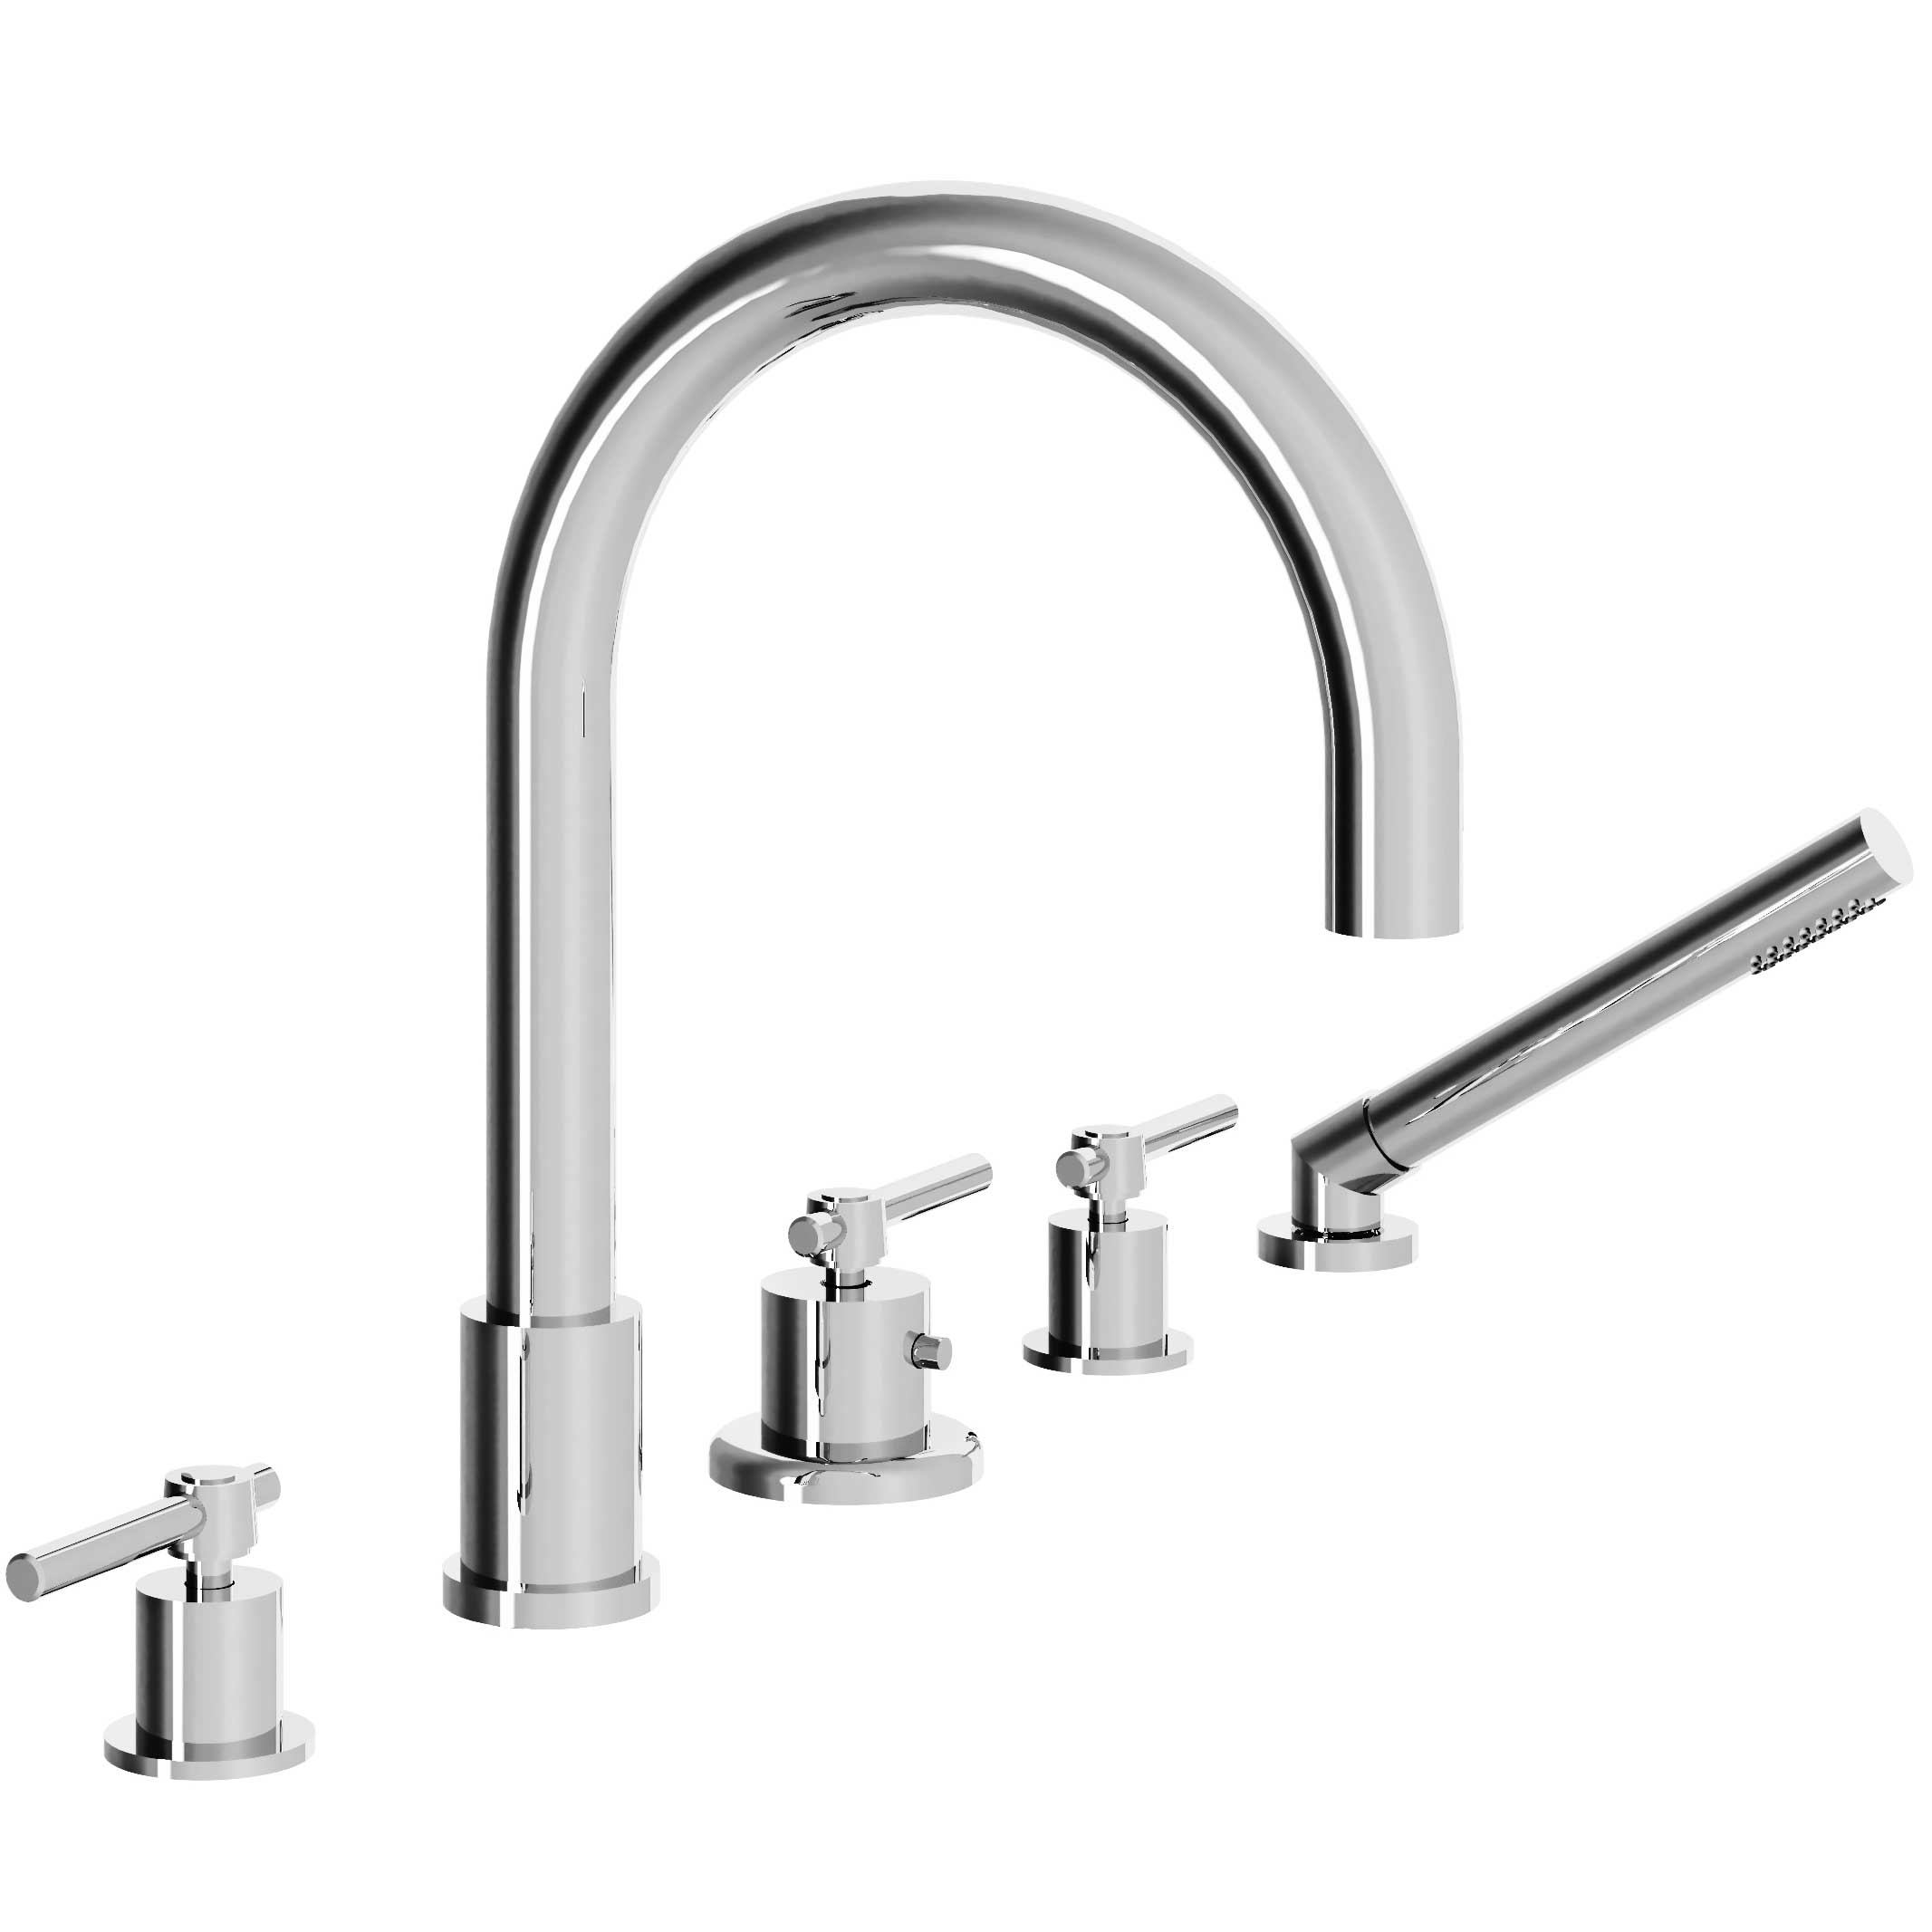 M91-3305T 5-hole bath and shower thermo. mixer